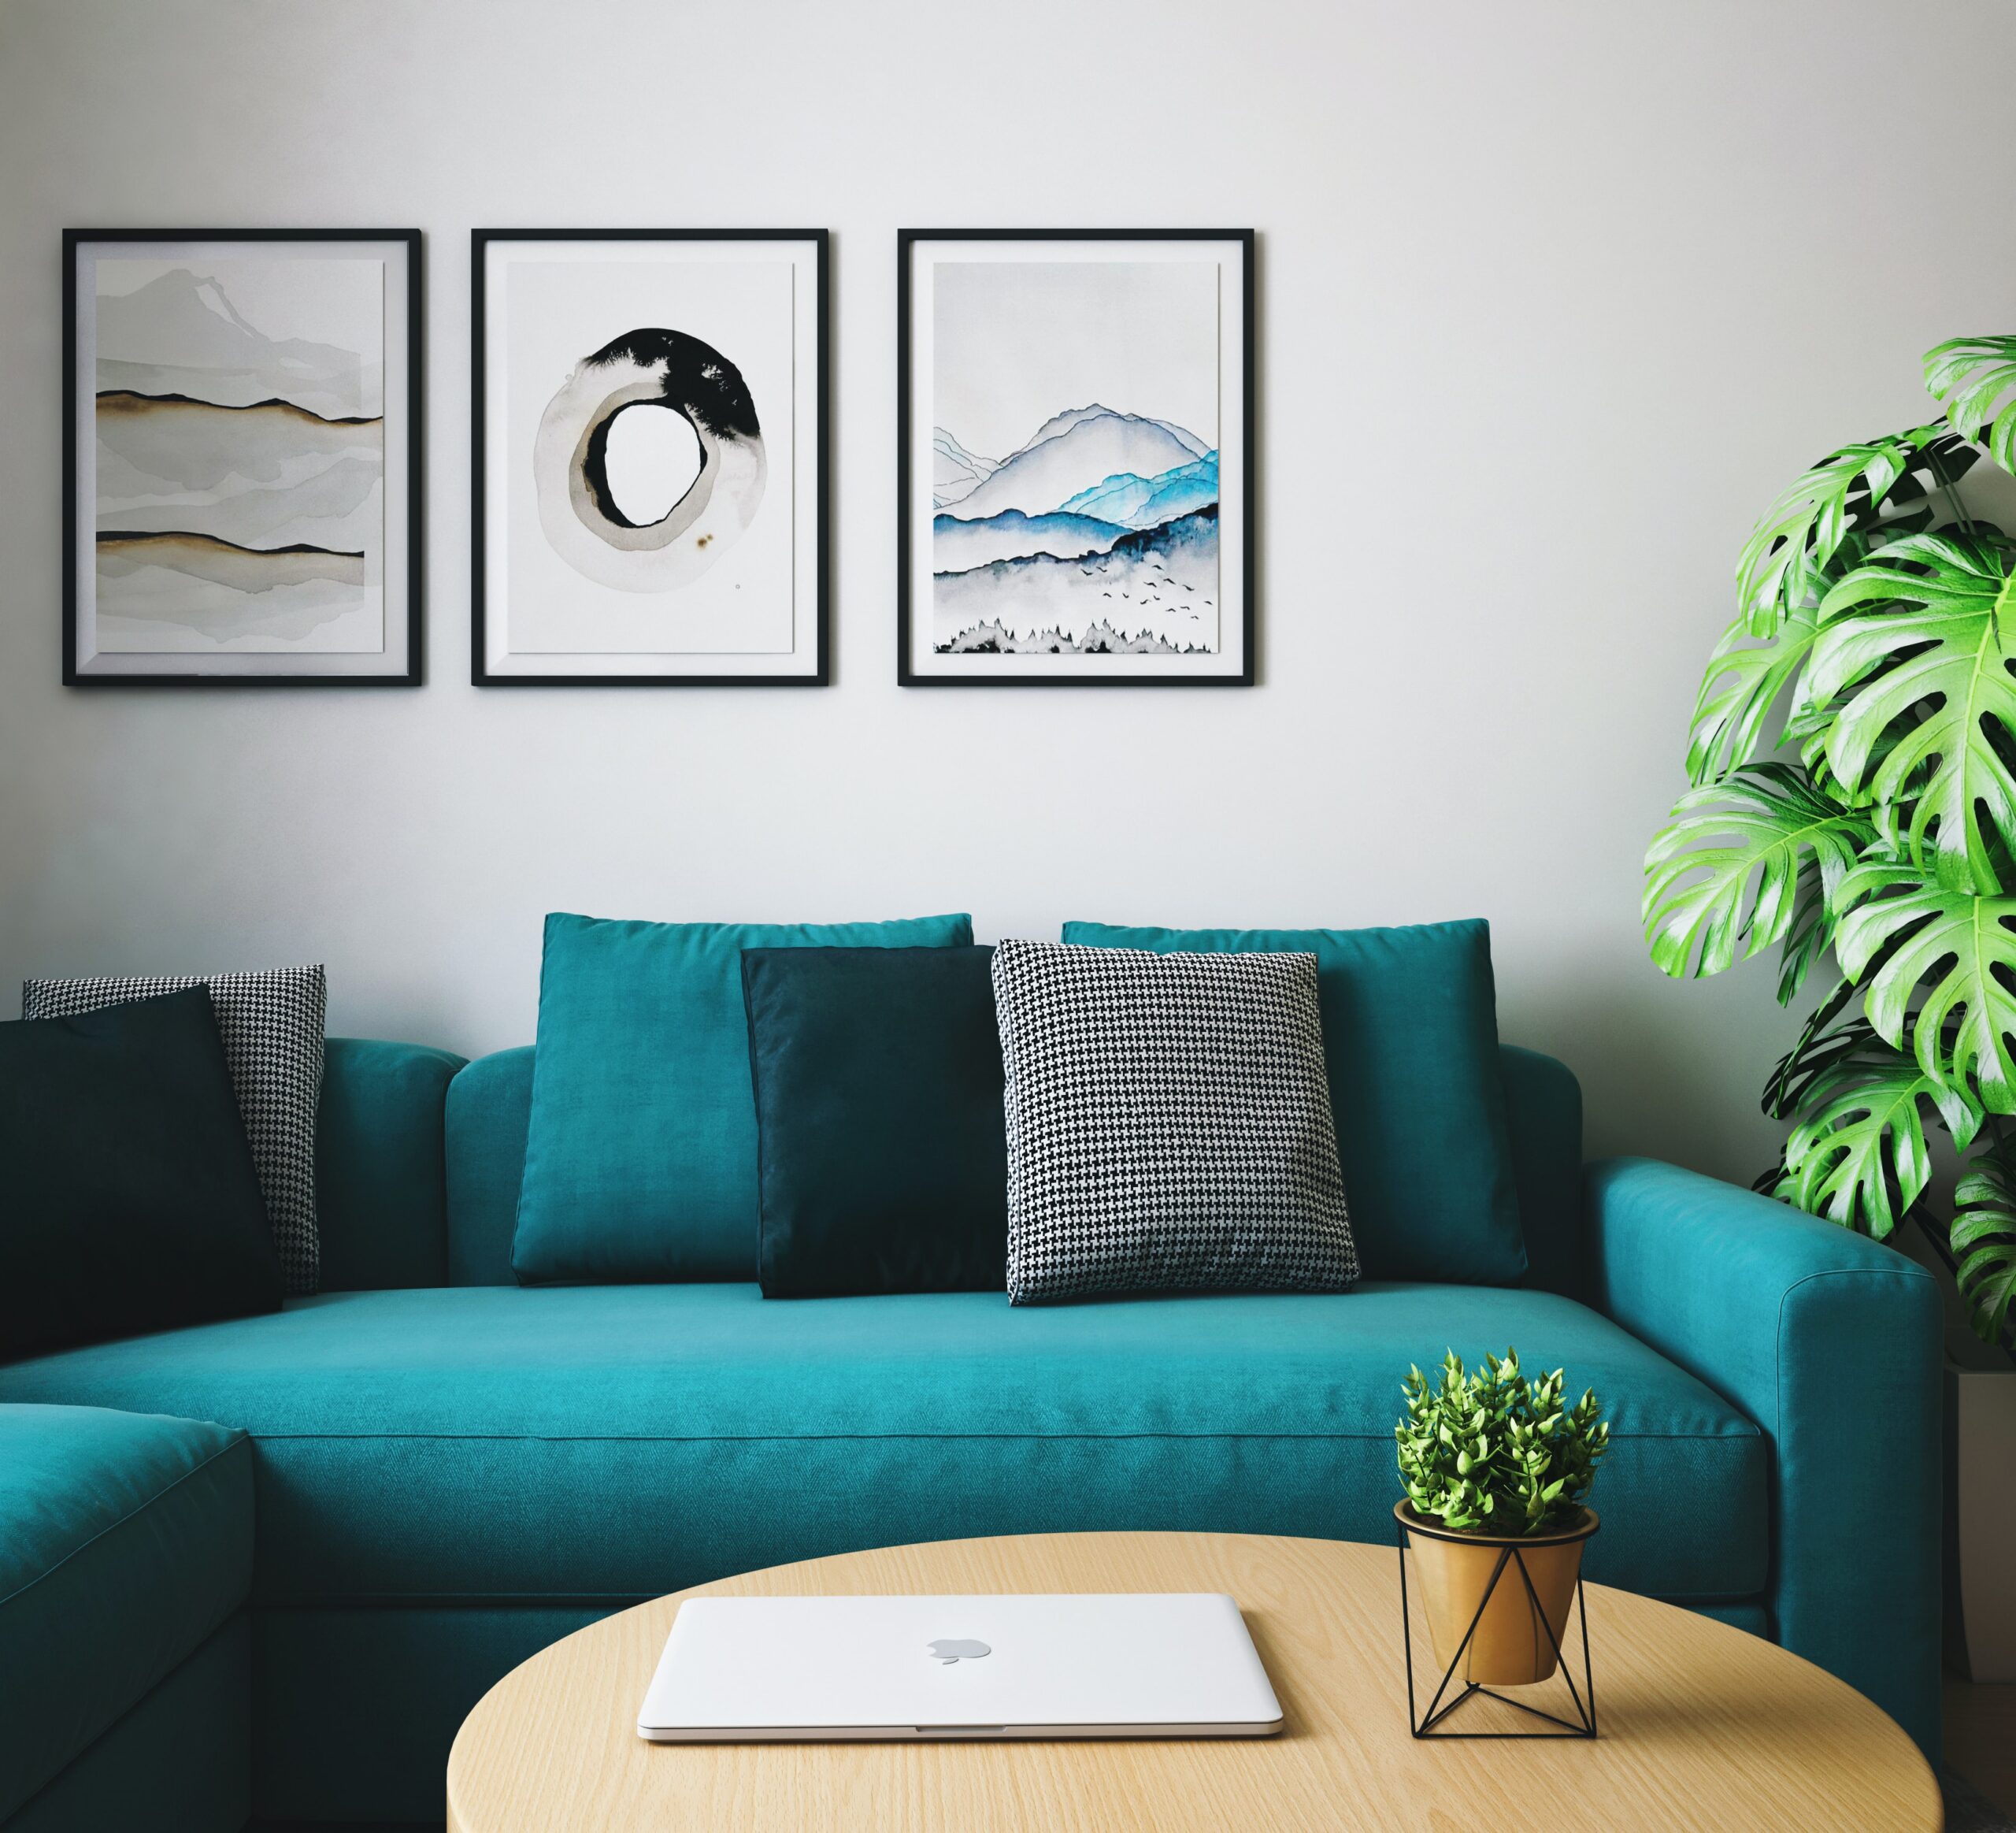 Image of living room with green couch